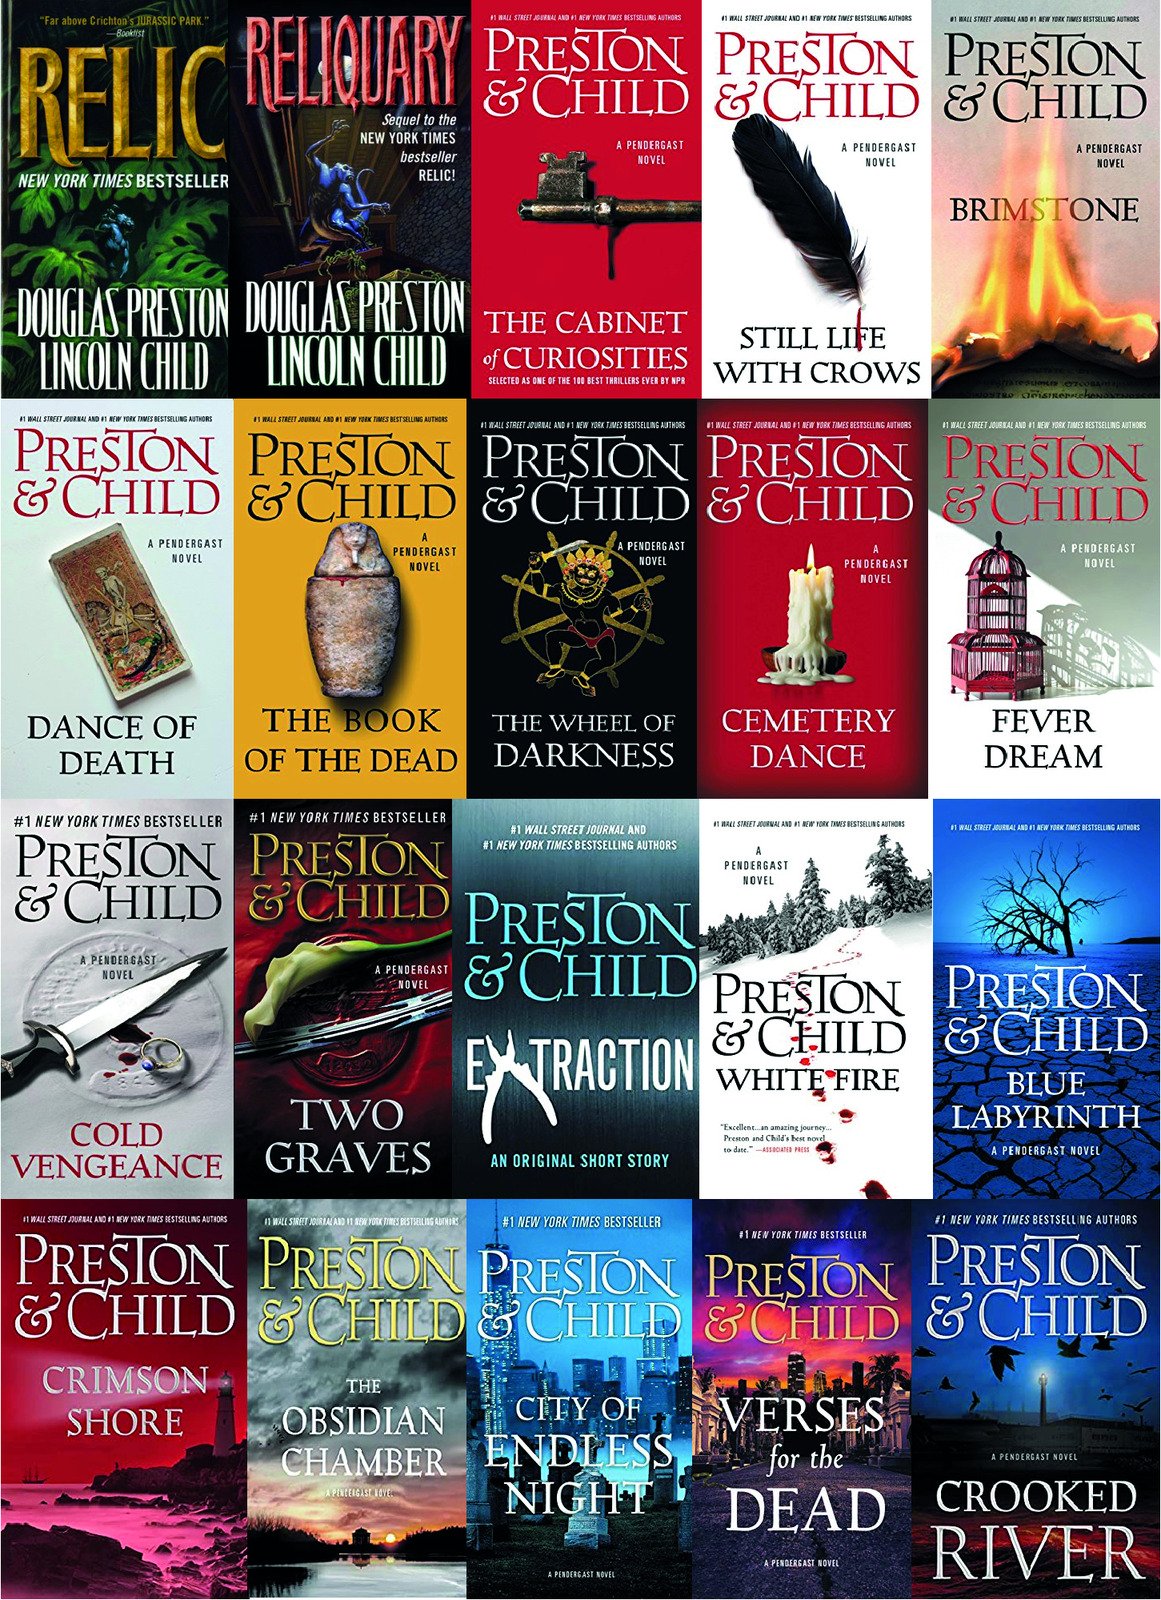 The Pendergast Series by Douglas Preston & Lincoln Child ~ 19 MP3 AUDIOBOOK COLLECTION